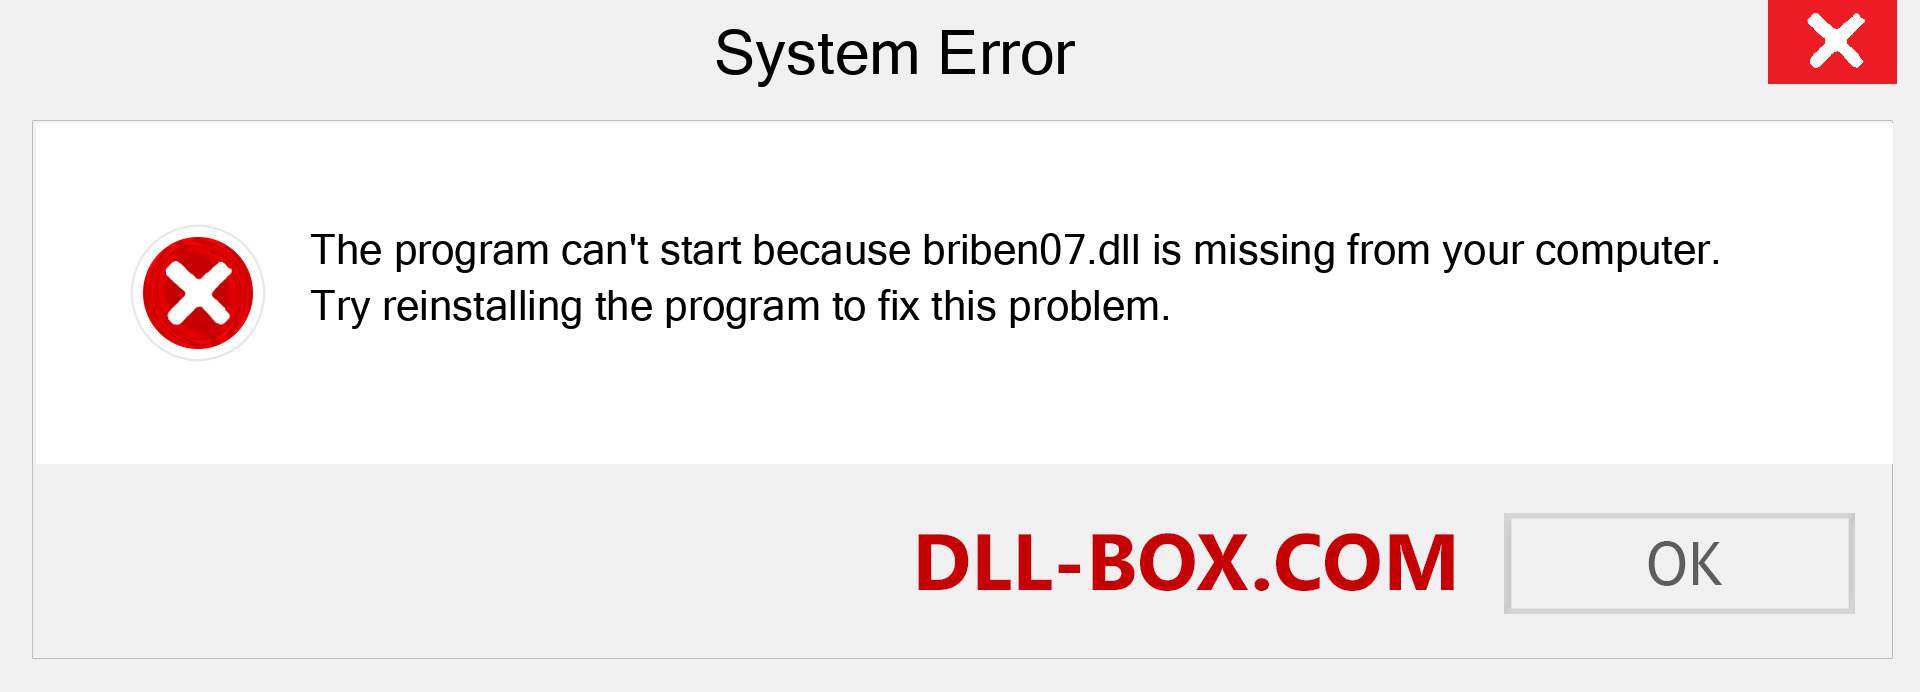  briben07.dll file is missing?. Download for Windows 7, 8, 10 - Fix  briben07 dll Missing Error on Windows, photos, images